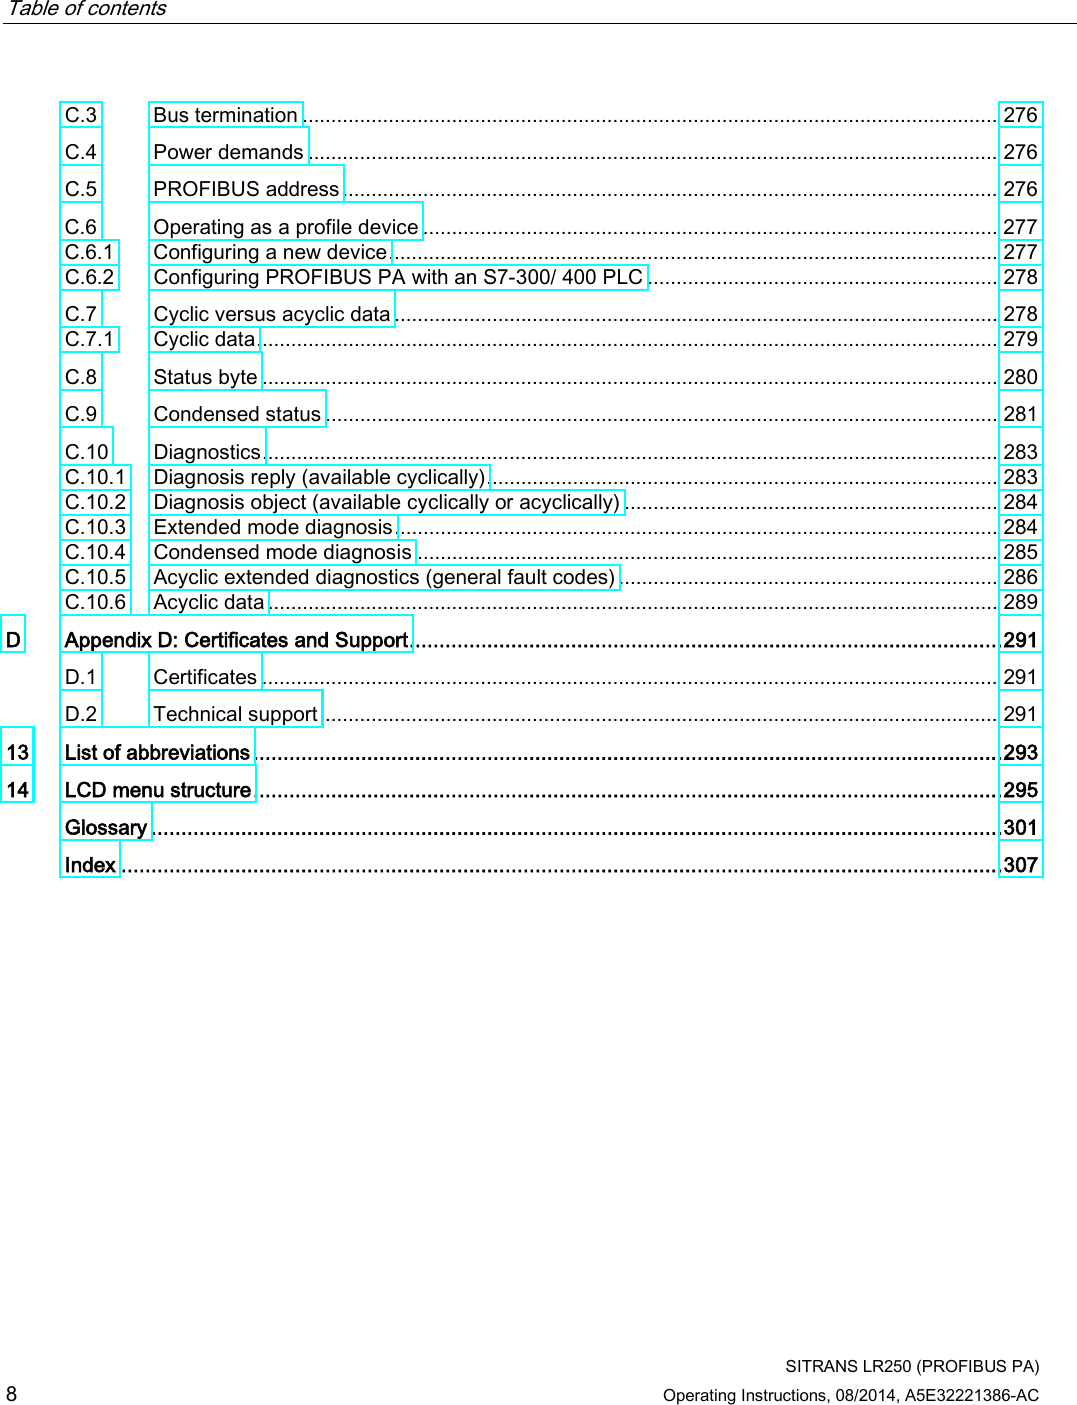 Table of contents      SITRANS LR250 (PROFIBUS PA) 8 Operating Instructions, 08/2014, A5E32221386-AC C.3 Bus termination ......................................................................................................................... 276 C.4 Power demands ........................................................................................................................ 276 C.5 PROFIBUS address .................................................................................................................. 276 C.6 Operating as a profile device .................................................................................................... 277 C.6.1 Configuring a new device .......................................................................................................... 277 C.6.2 Configuring PROFIBUS PA with an S7-300/ 400 PLC ............................................................. 278 C.7 Cyclic versus acyclic data ......................................................................................................... 278 C.7.1 Cyclic data ................................................................................................................................. 279 C.8 Status byte ................................................................................................................................ 280 C.9 Condensed status ..................................................................................................................... 281 C.10 Diagnostics ................................................................................................................................ 283 C.10.1 Diagnosis reply (available cyclically) ......................................................................................... 283 C.10.2 Diagnosis object (available cyclically or acyclically) ................................................................. 284 C.10.3 Extended mode diagnosis ......................................................................................................... 284 C.10.4 Condensed mode diagnosis ..................................................................................................... 285 C.10.5 Acyclic extended diagnostics (general fault codes) .................................................................. 286 C.10.6 Acyclic data ............................................................................................................................... 289 D  Appendix D: Certificates and Support ................................................................................................... 291 D.1 Certificates ................................................................................................................................ 291 D.2 Technical support ...................................................................................................................... 291 13 List of abbreviations ............................................................................................................................. 293 14 LCD menu structure ............................................................................................................................. 295  Glossary .............................................................................................................................................. 301  Index ................................................................................................................................................... 307 